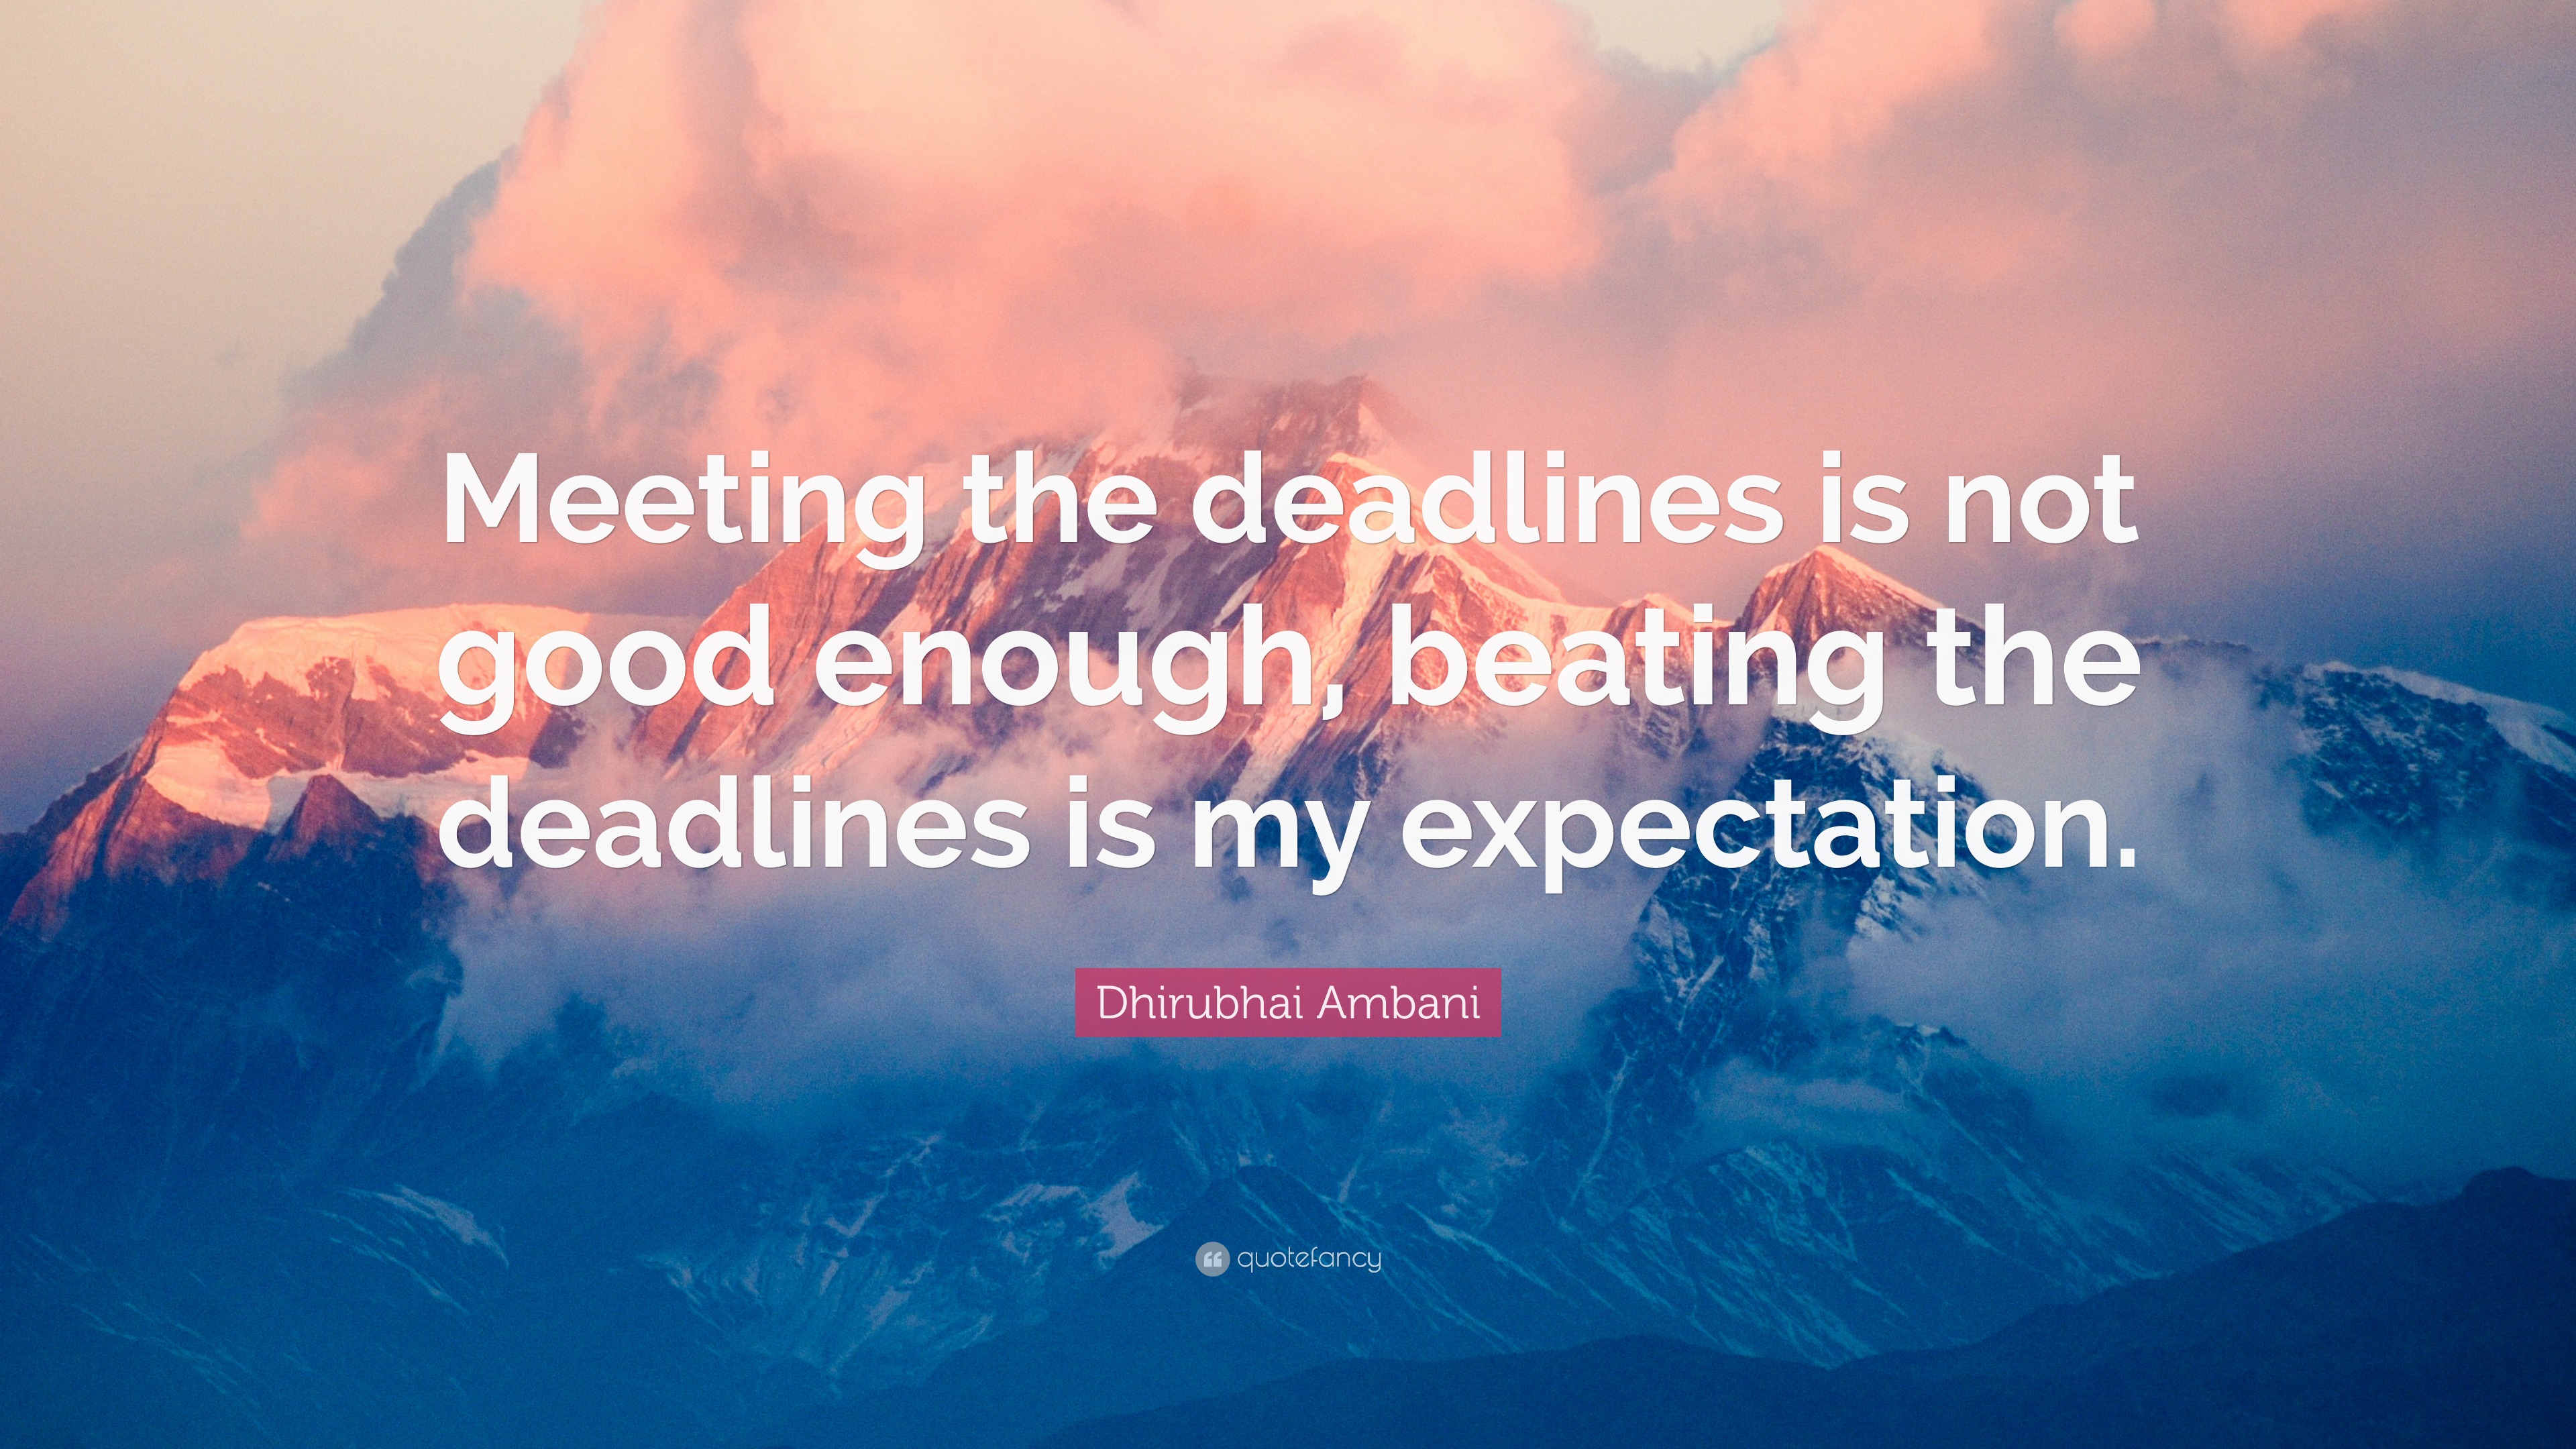 Dhirubhai Ambani Quote: “Meeting the deadlines is not good enough